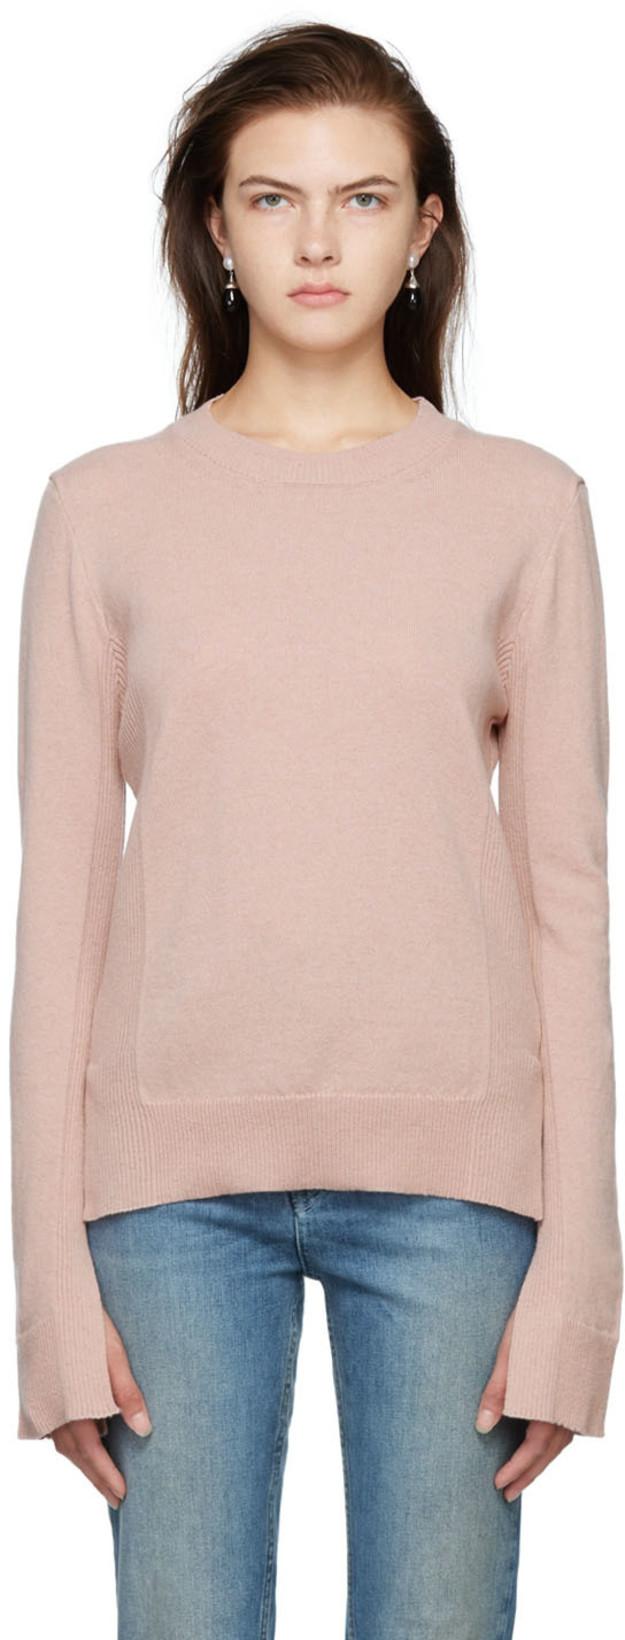 Pink Detailed Sweater by BITE